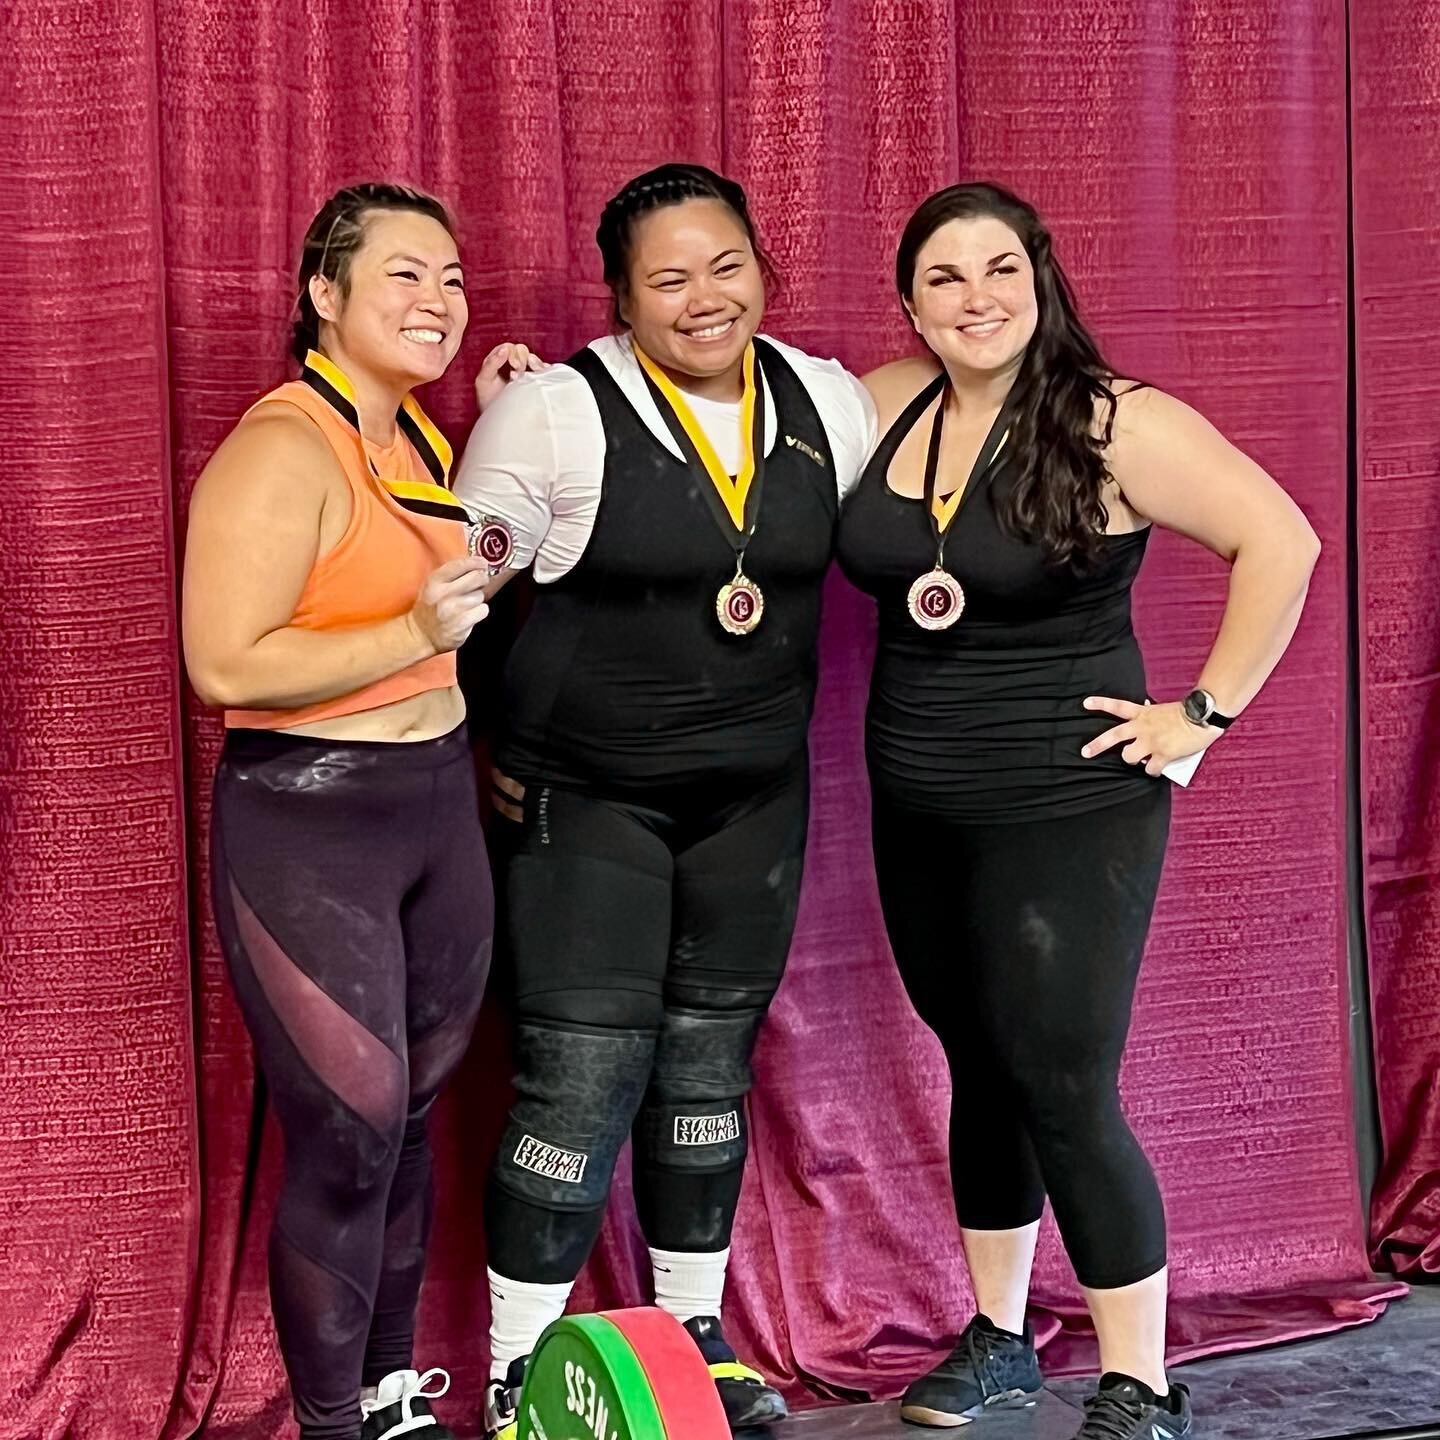 Congrats @crystalsayphire for coming in 🥈 in her first weightlifting competition. We are super proud of you! You are amazing 👏 

#weightlifting #2ndplace #crossfit #longbeachweightlifting